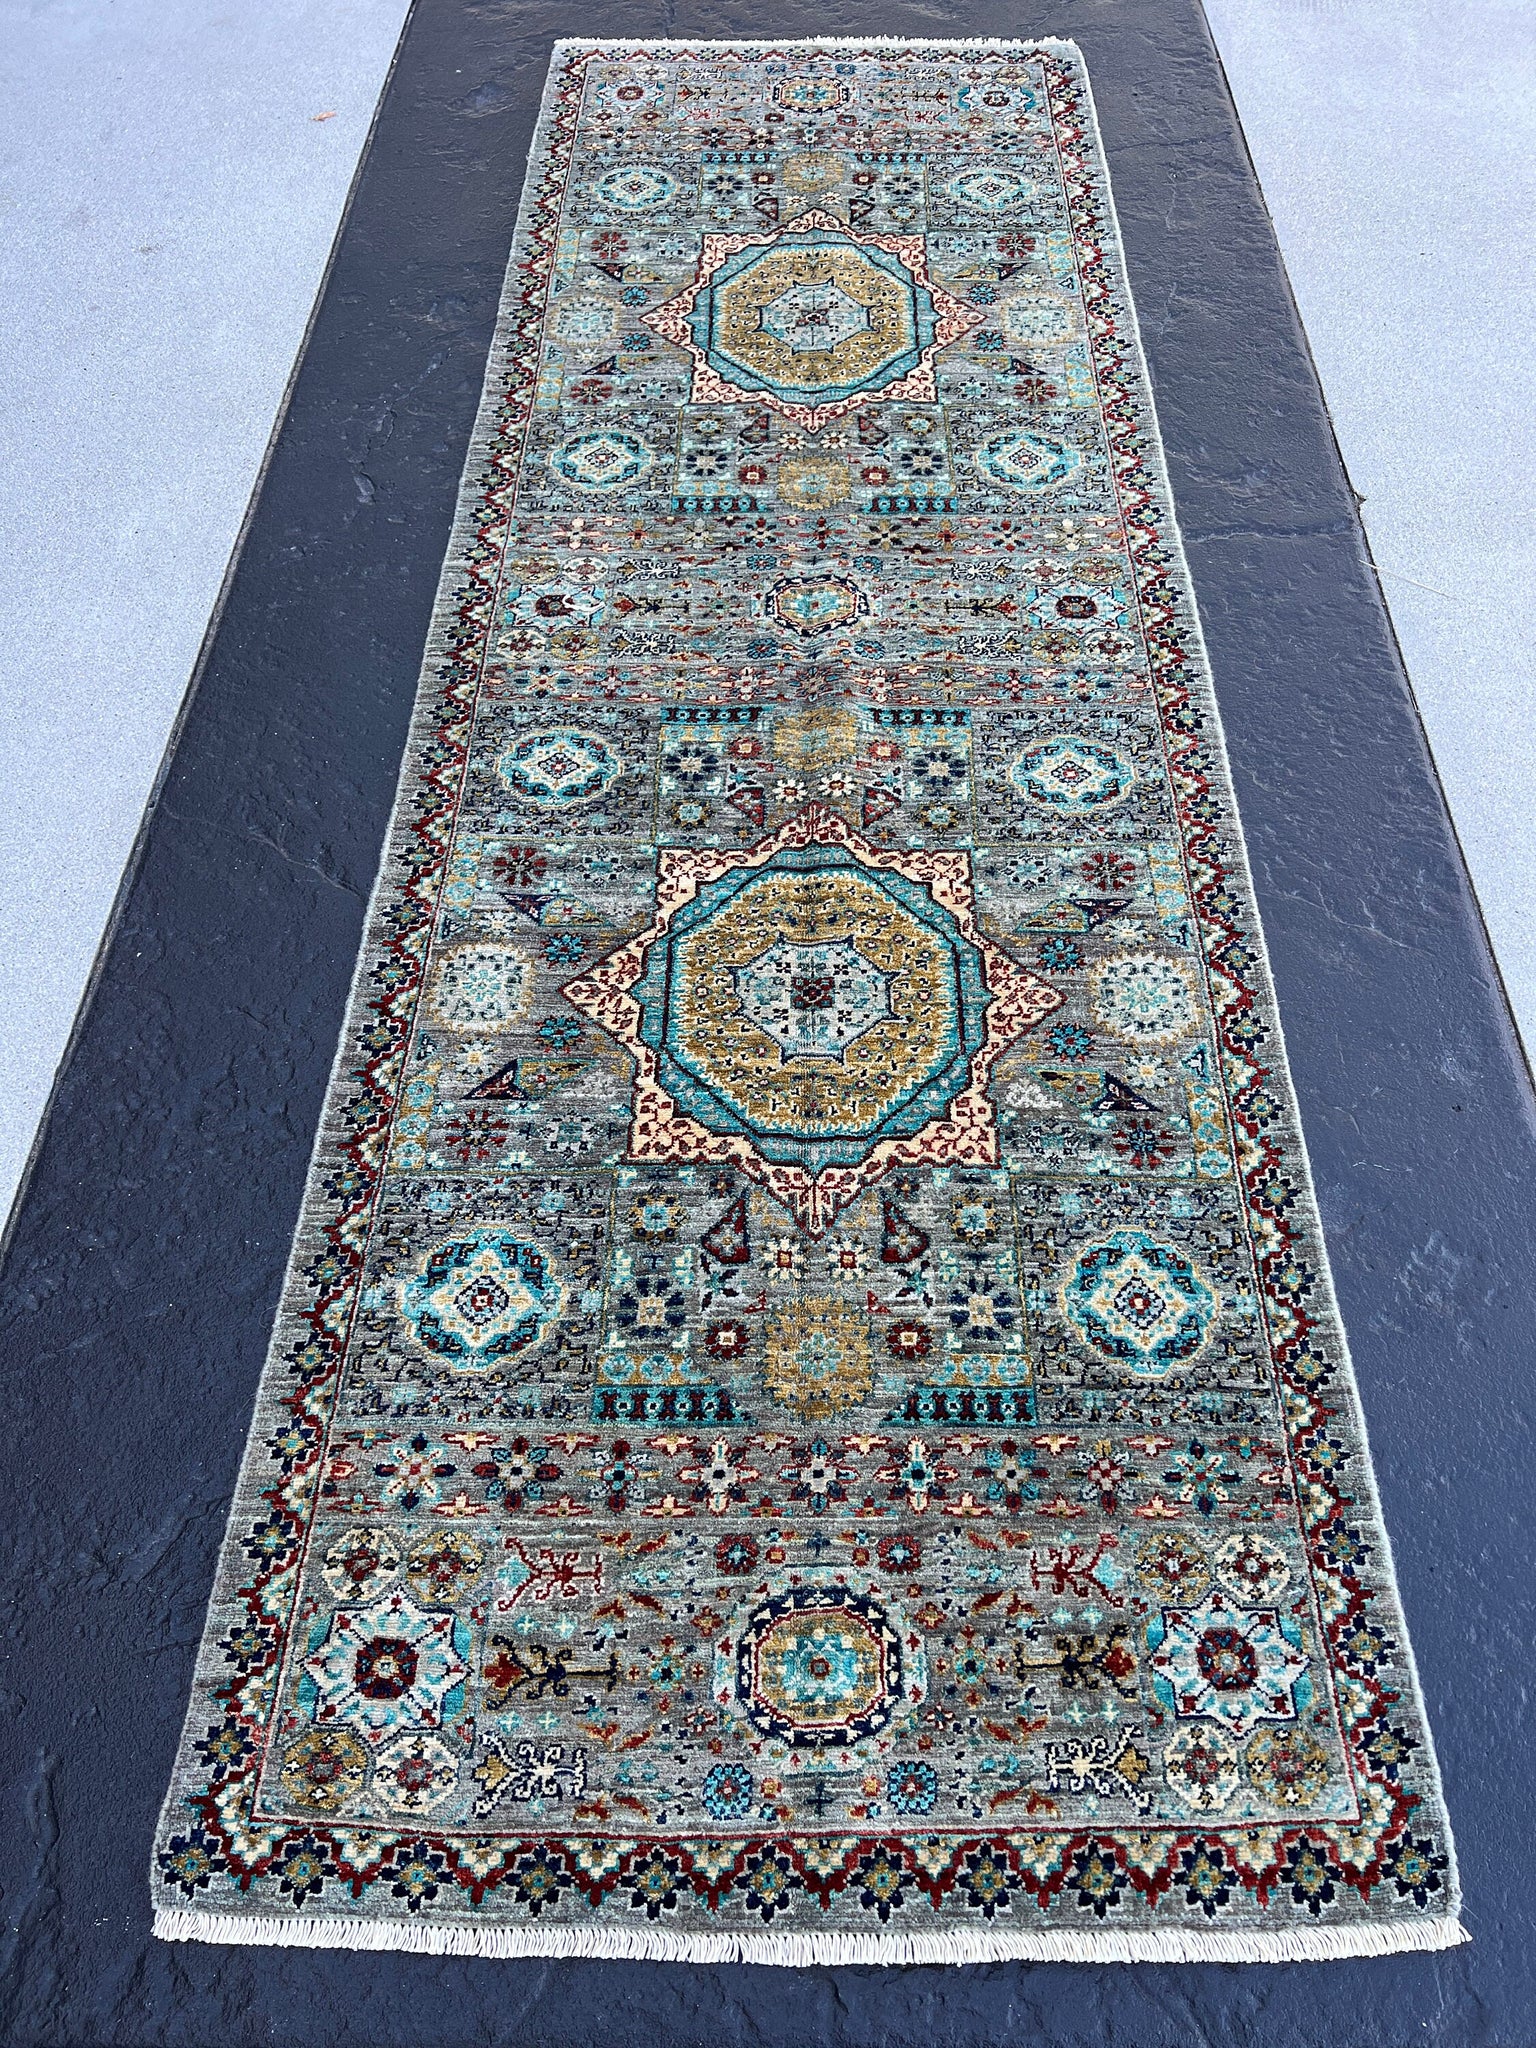 3x8 (90x245) Handmade Afghan Rug Runner | Grey Turquoise Golden Yellow Ivory Beige Orange Blue | Tribal Oriental Hand Knotted Persian Oushak